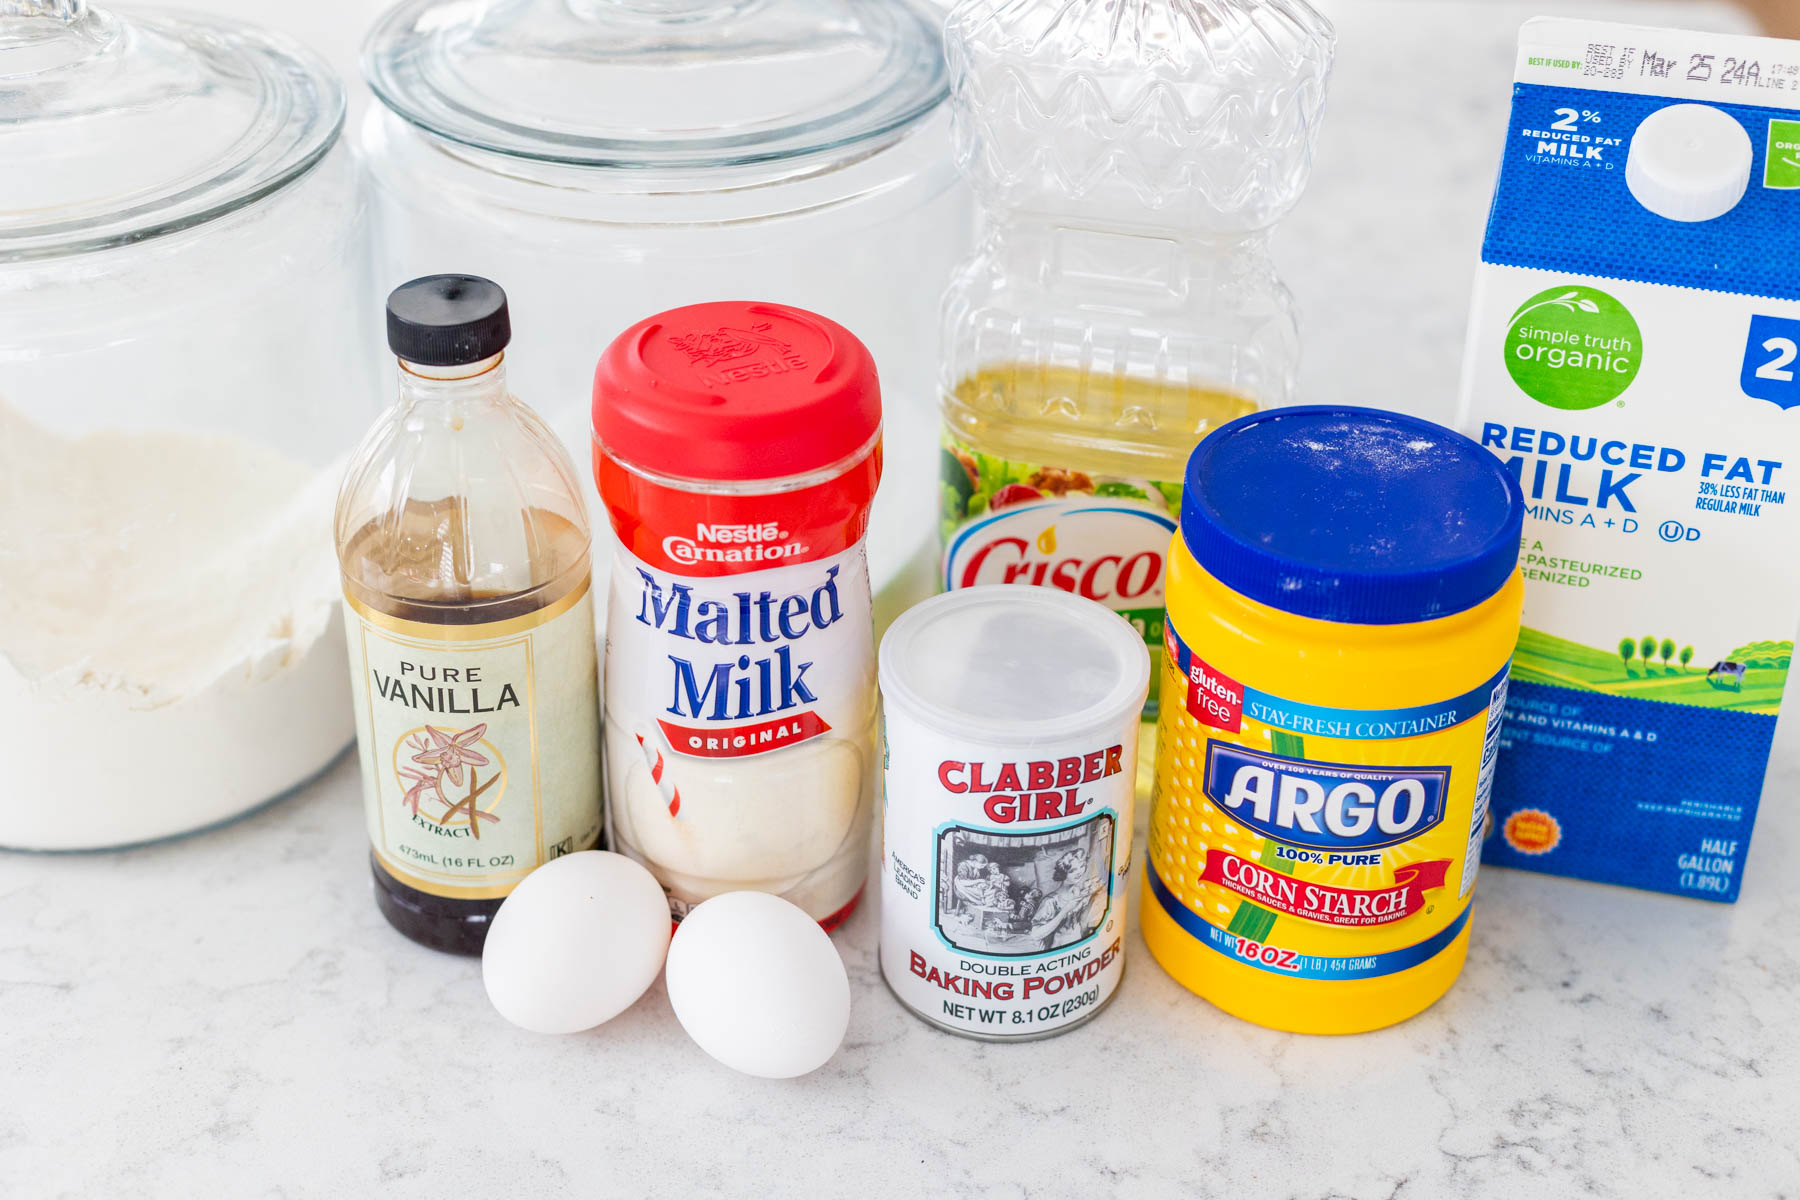 The ingredients to make malted waffles are on the counter.